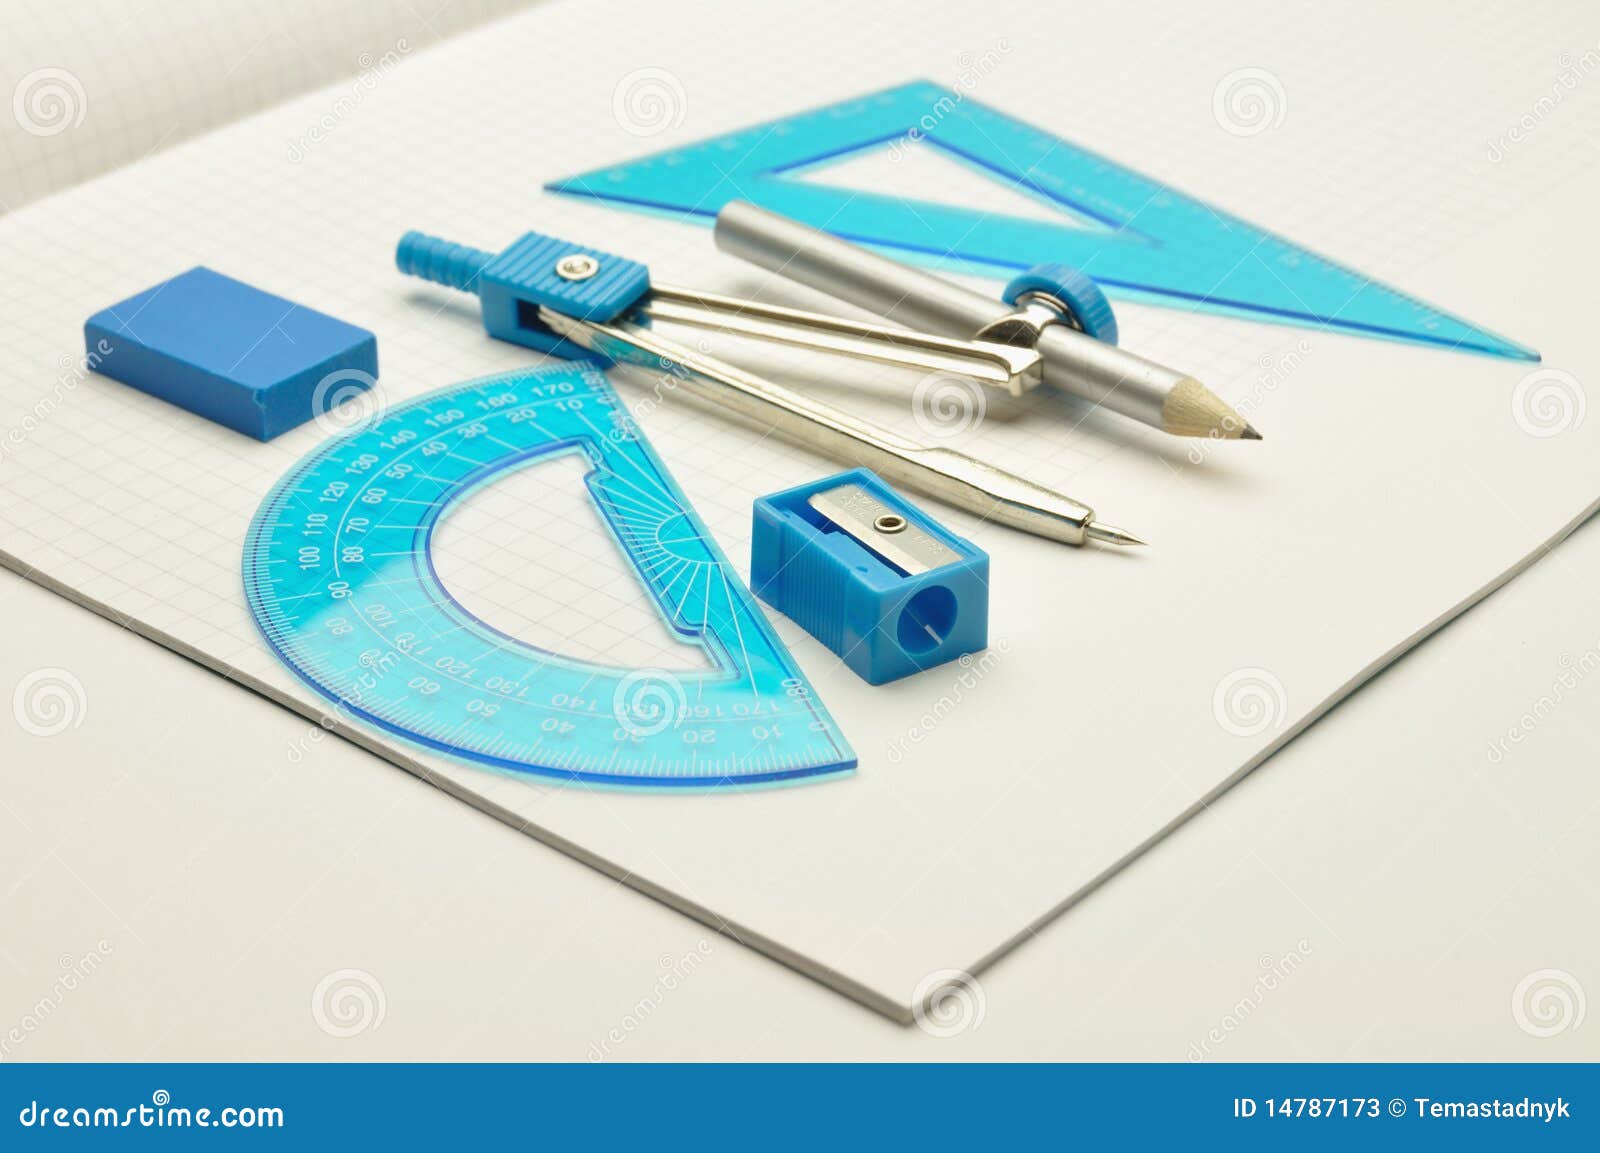 rulers, compasses, eraser with sharpener for noteb